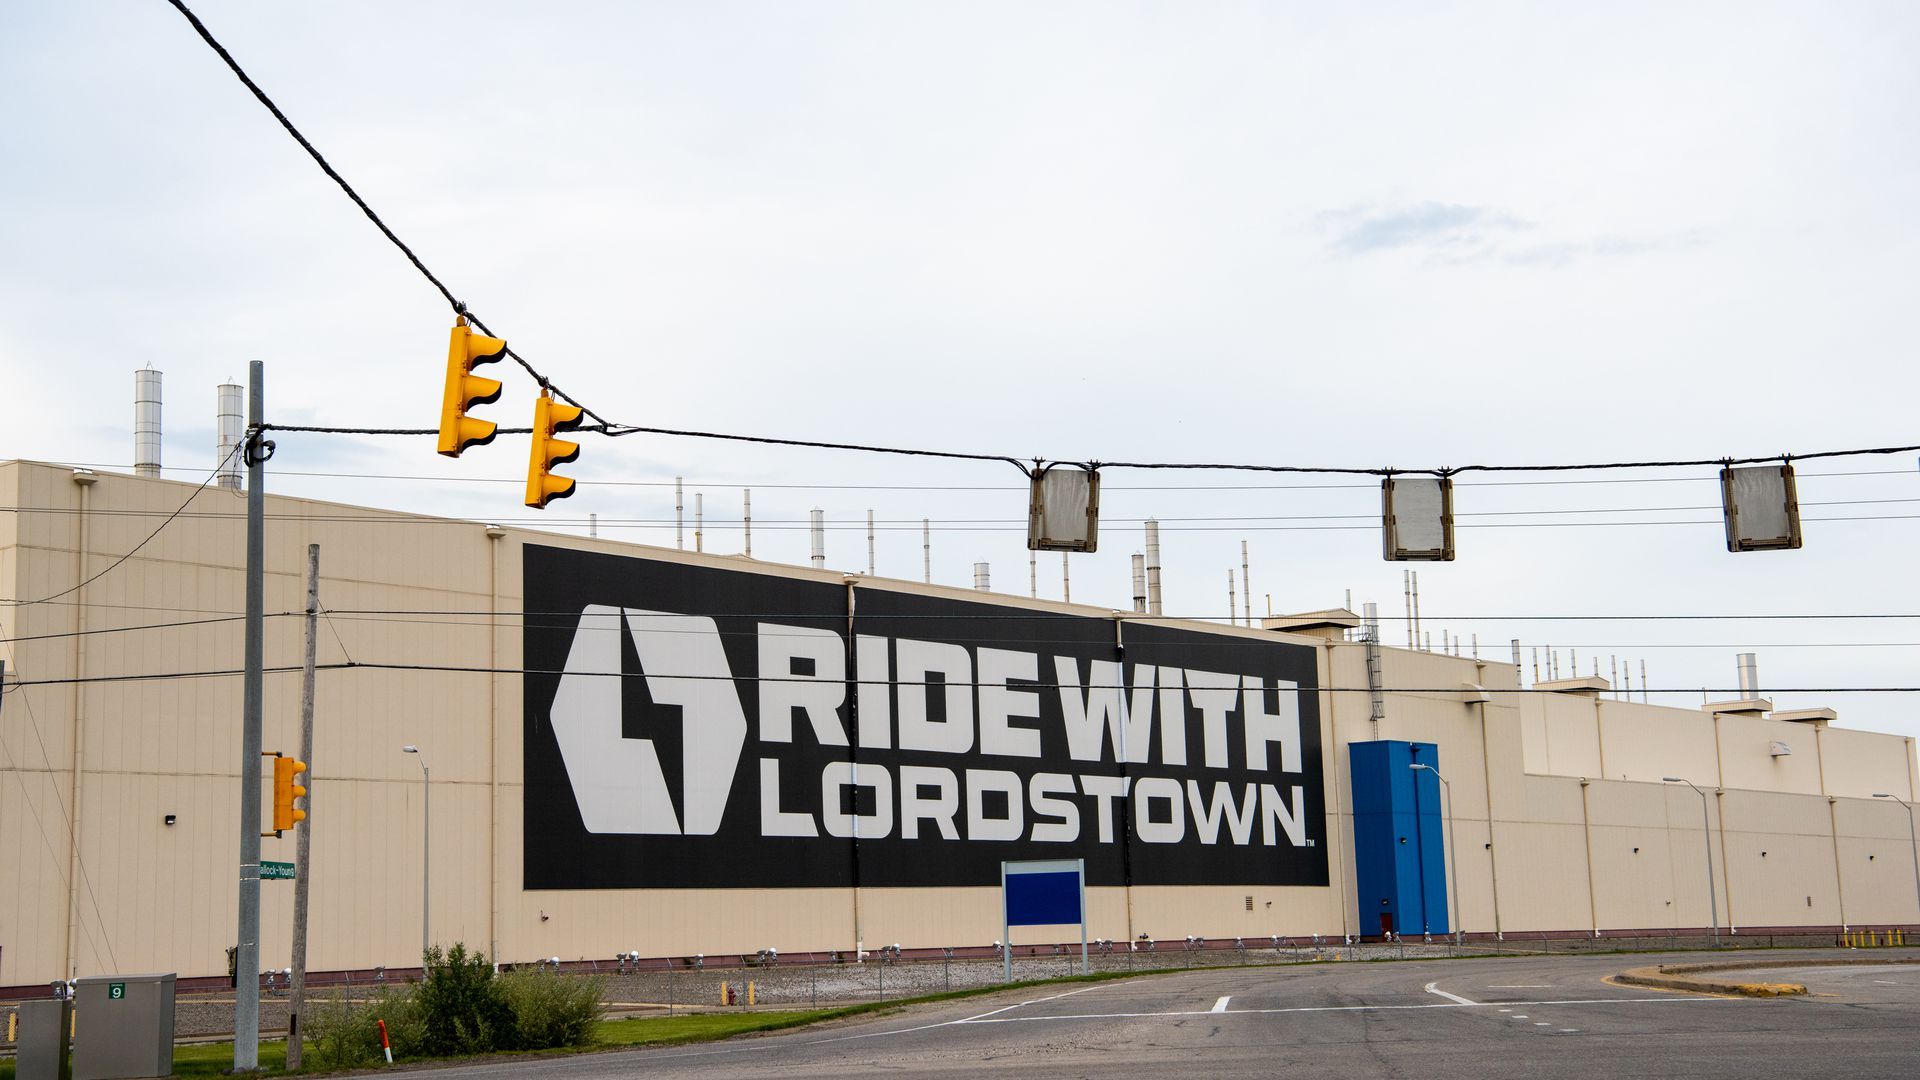 Lordstown signage